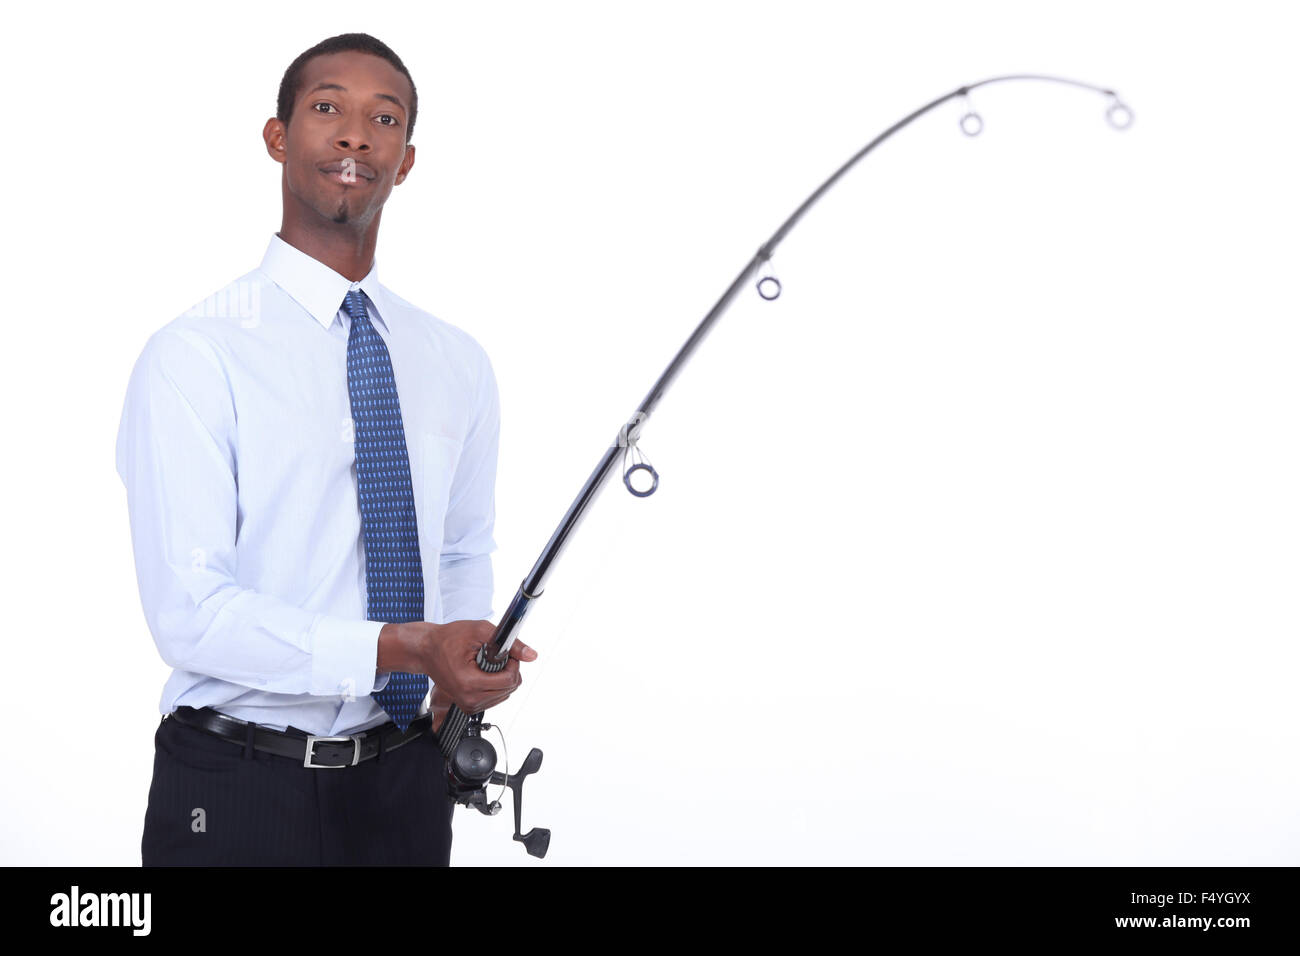 Man in a shirt and tie using a fishing rod Stock Photo - Alamy